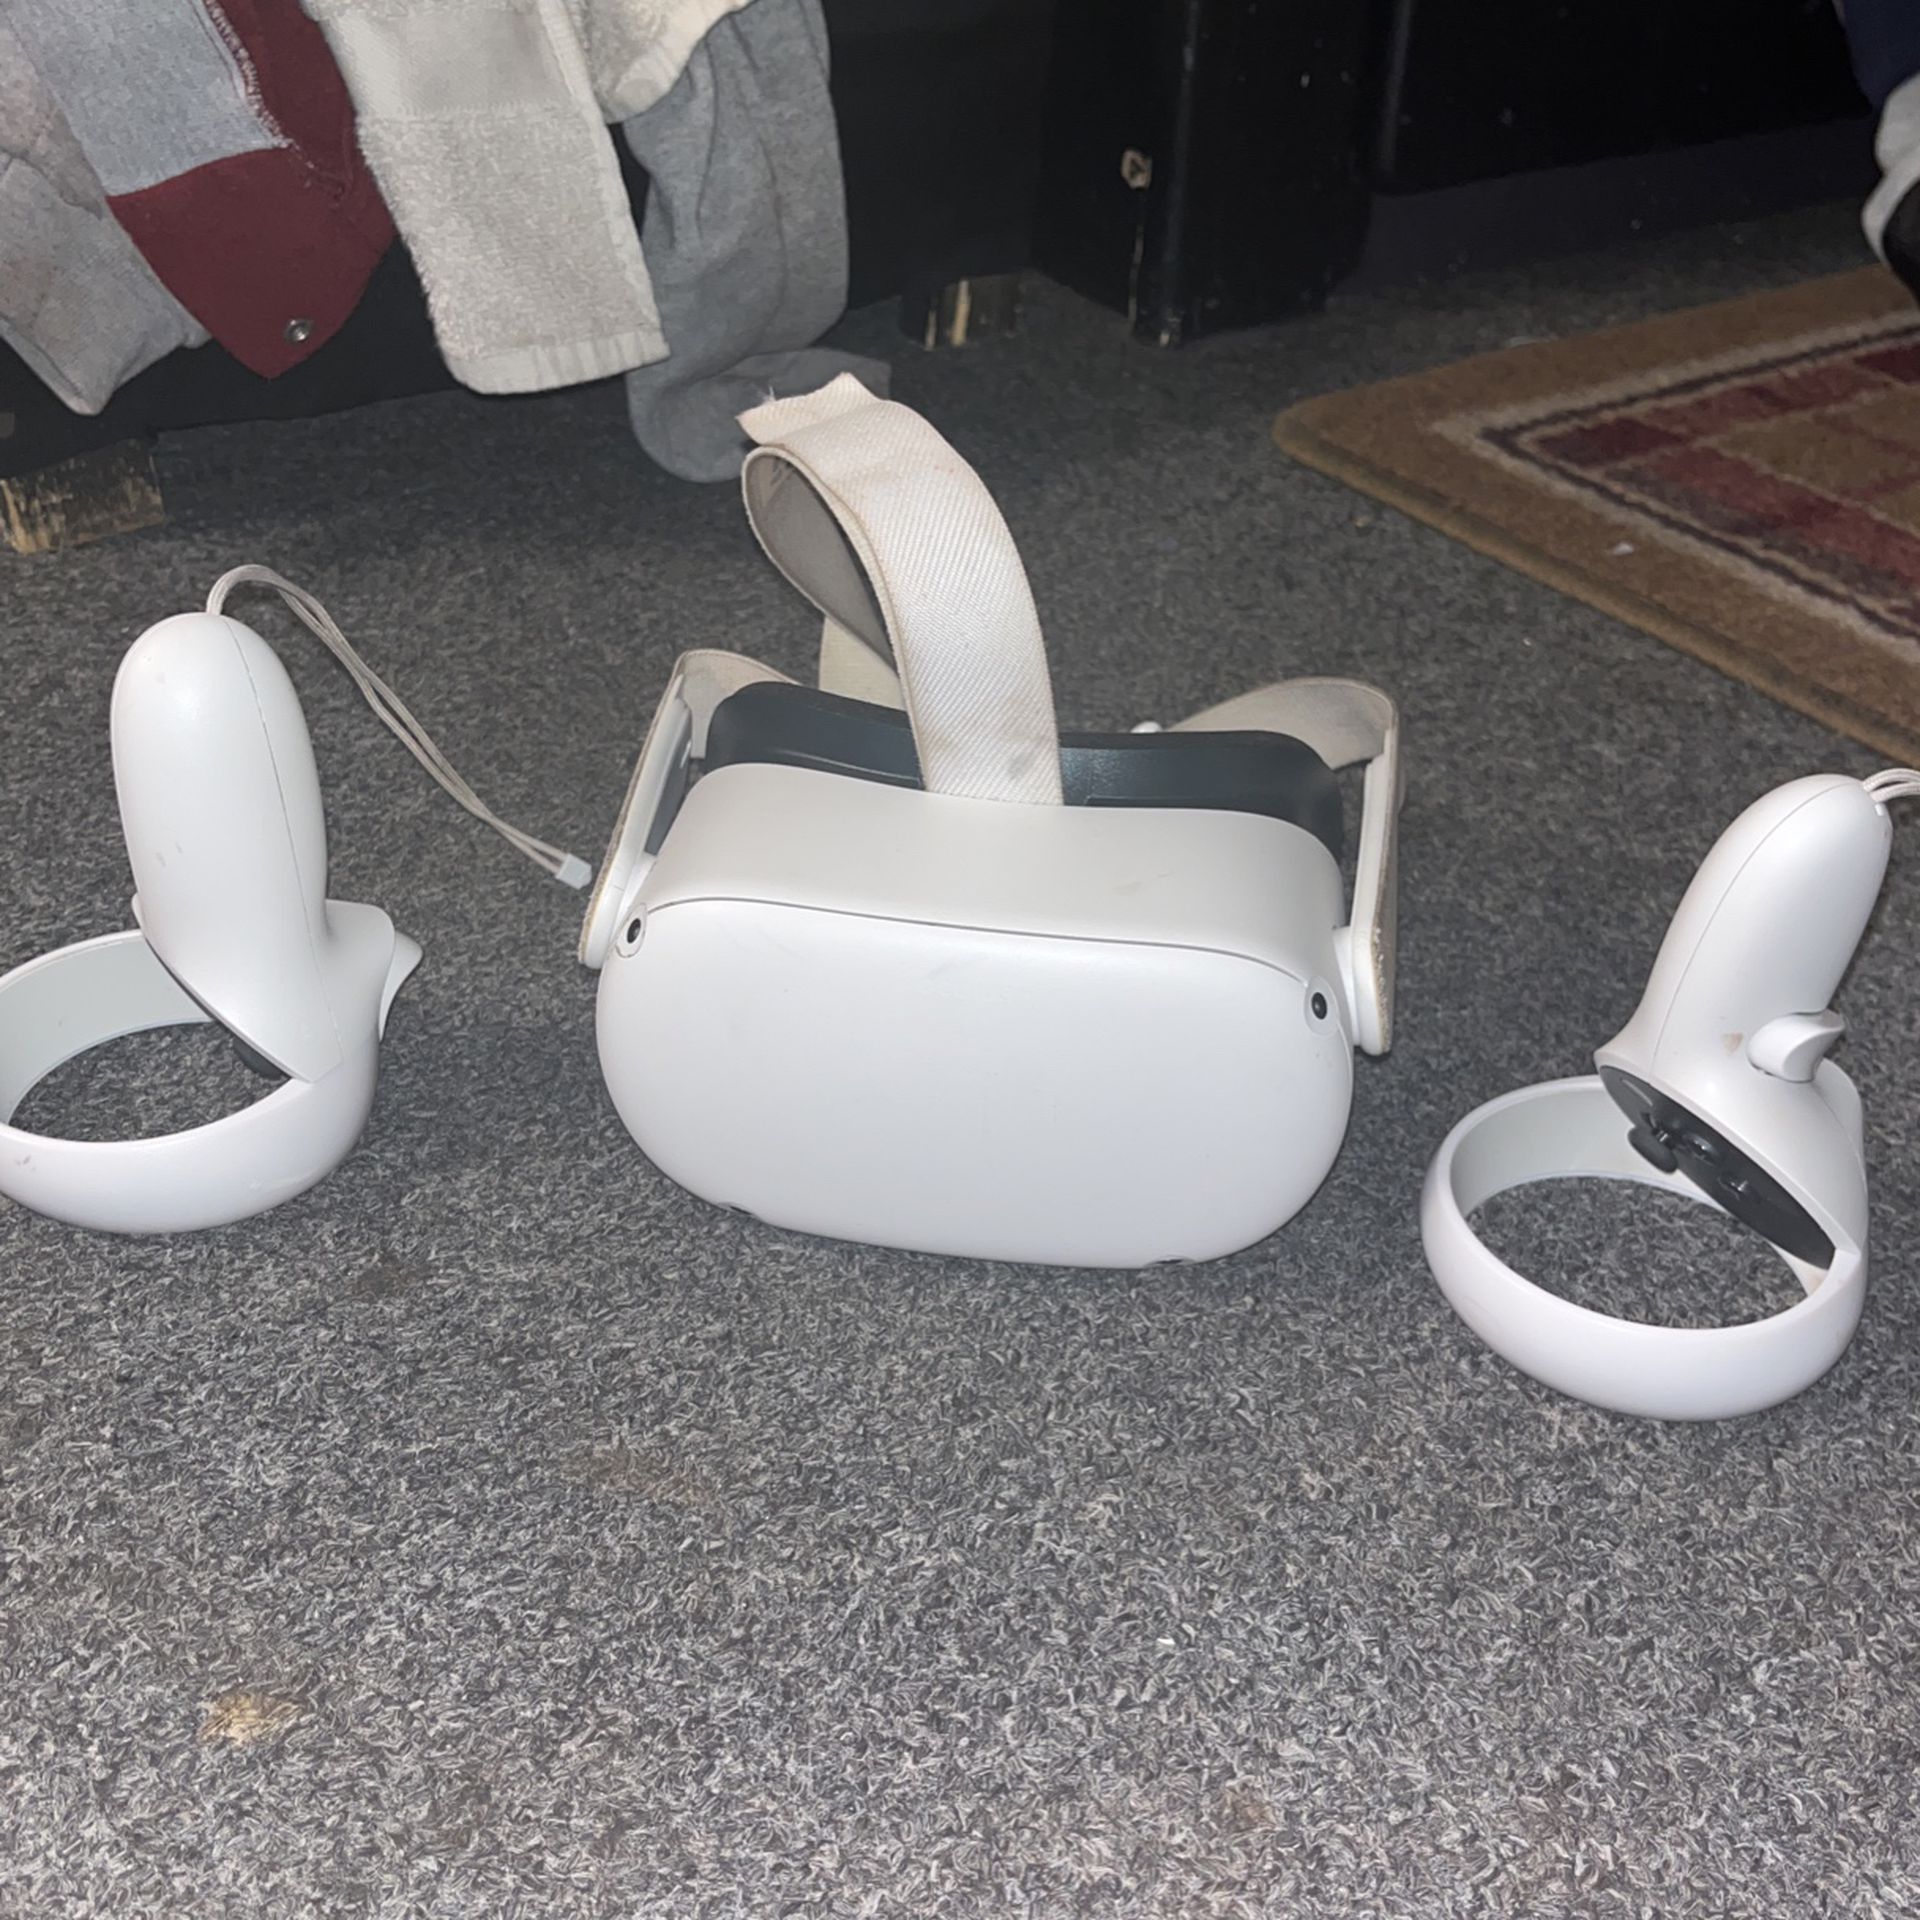 Oculus quest two